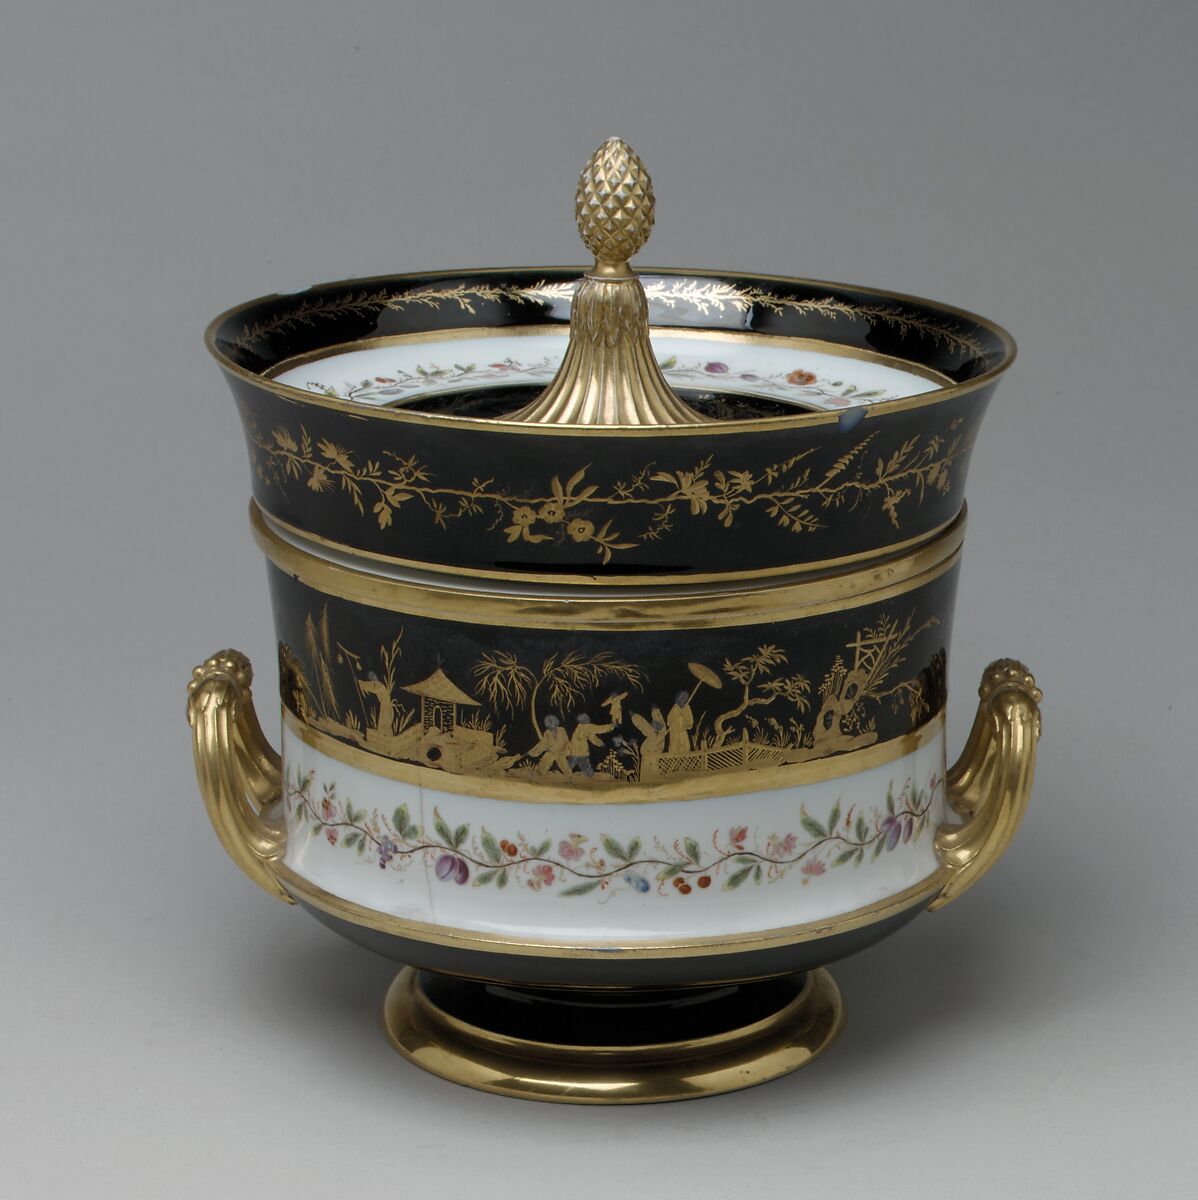 Ice cream cooler, Sèvres Manufactory (French, 1740–present), Hard-paste porcelain, French, Sèvres 